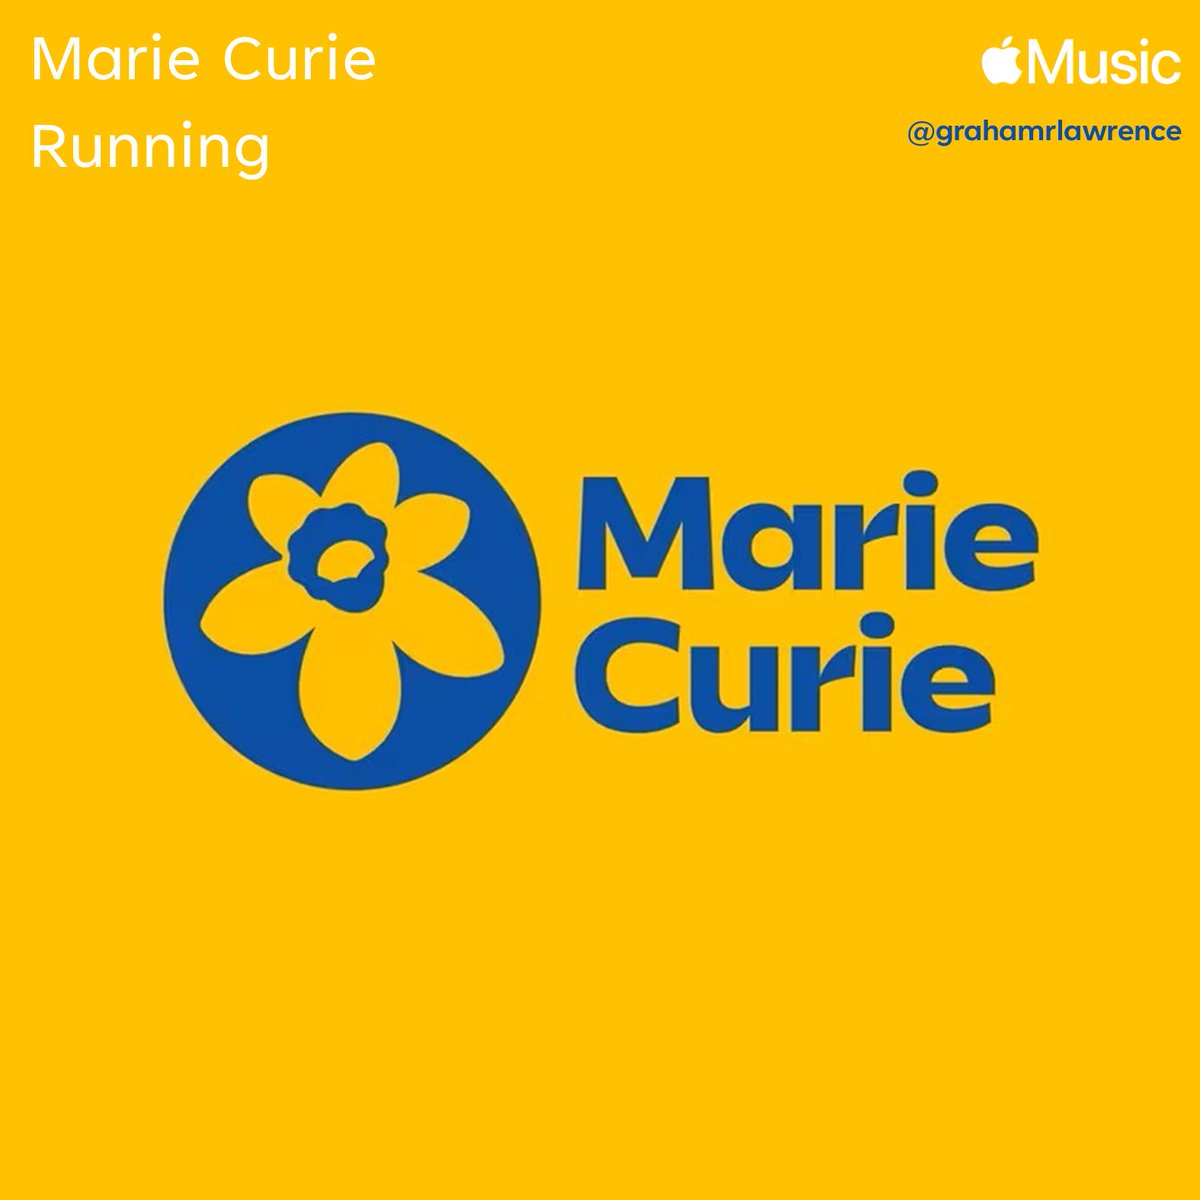 Running Playlist | 'Running 80K in May 2024 for Marie Curie': music.apple.com/gb/playlist/ma…

🎵Free Your Mind🎵En Vogue

Fundraiser: bio.link/grahamrlawrence

#MarieCurie #TeamMarieCurie #Fundraiser #Running #GrahamsRunForMarieCurie #Playlist #EnVogue #FreeYourMind 

@EnVogueMusic